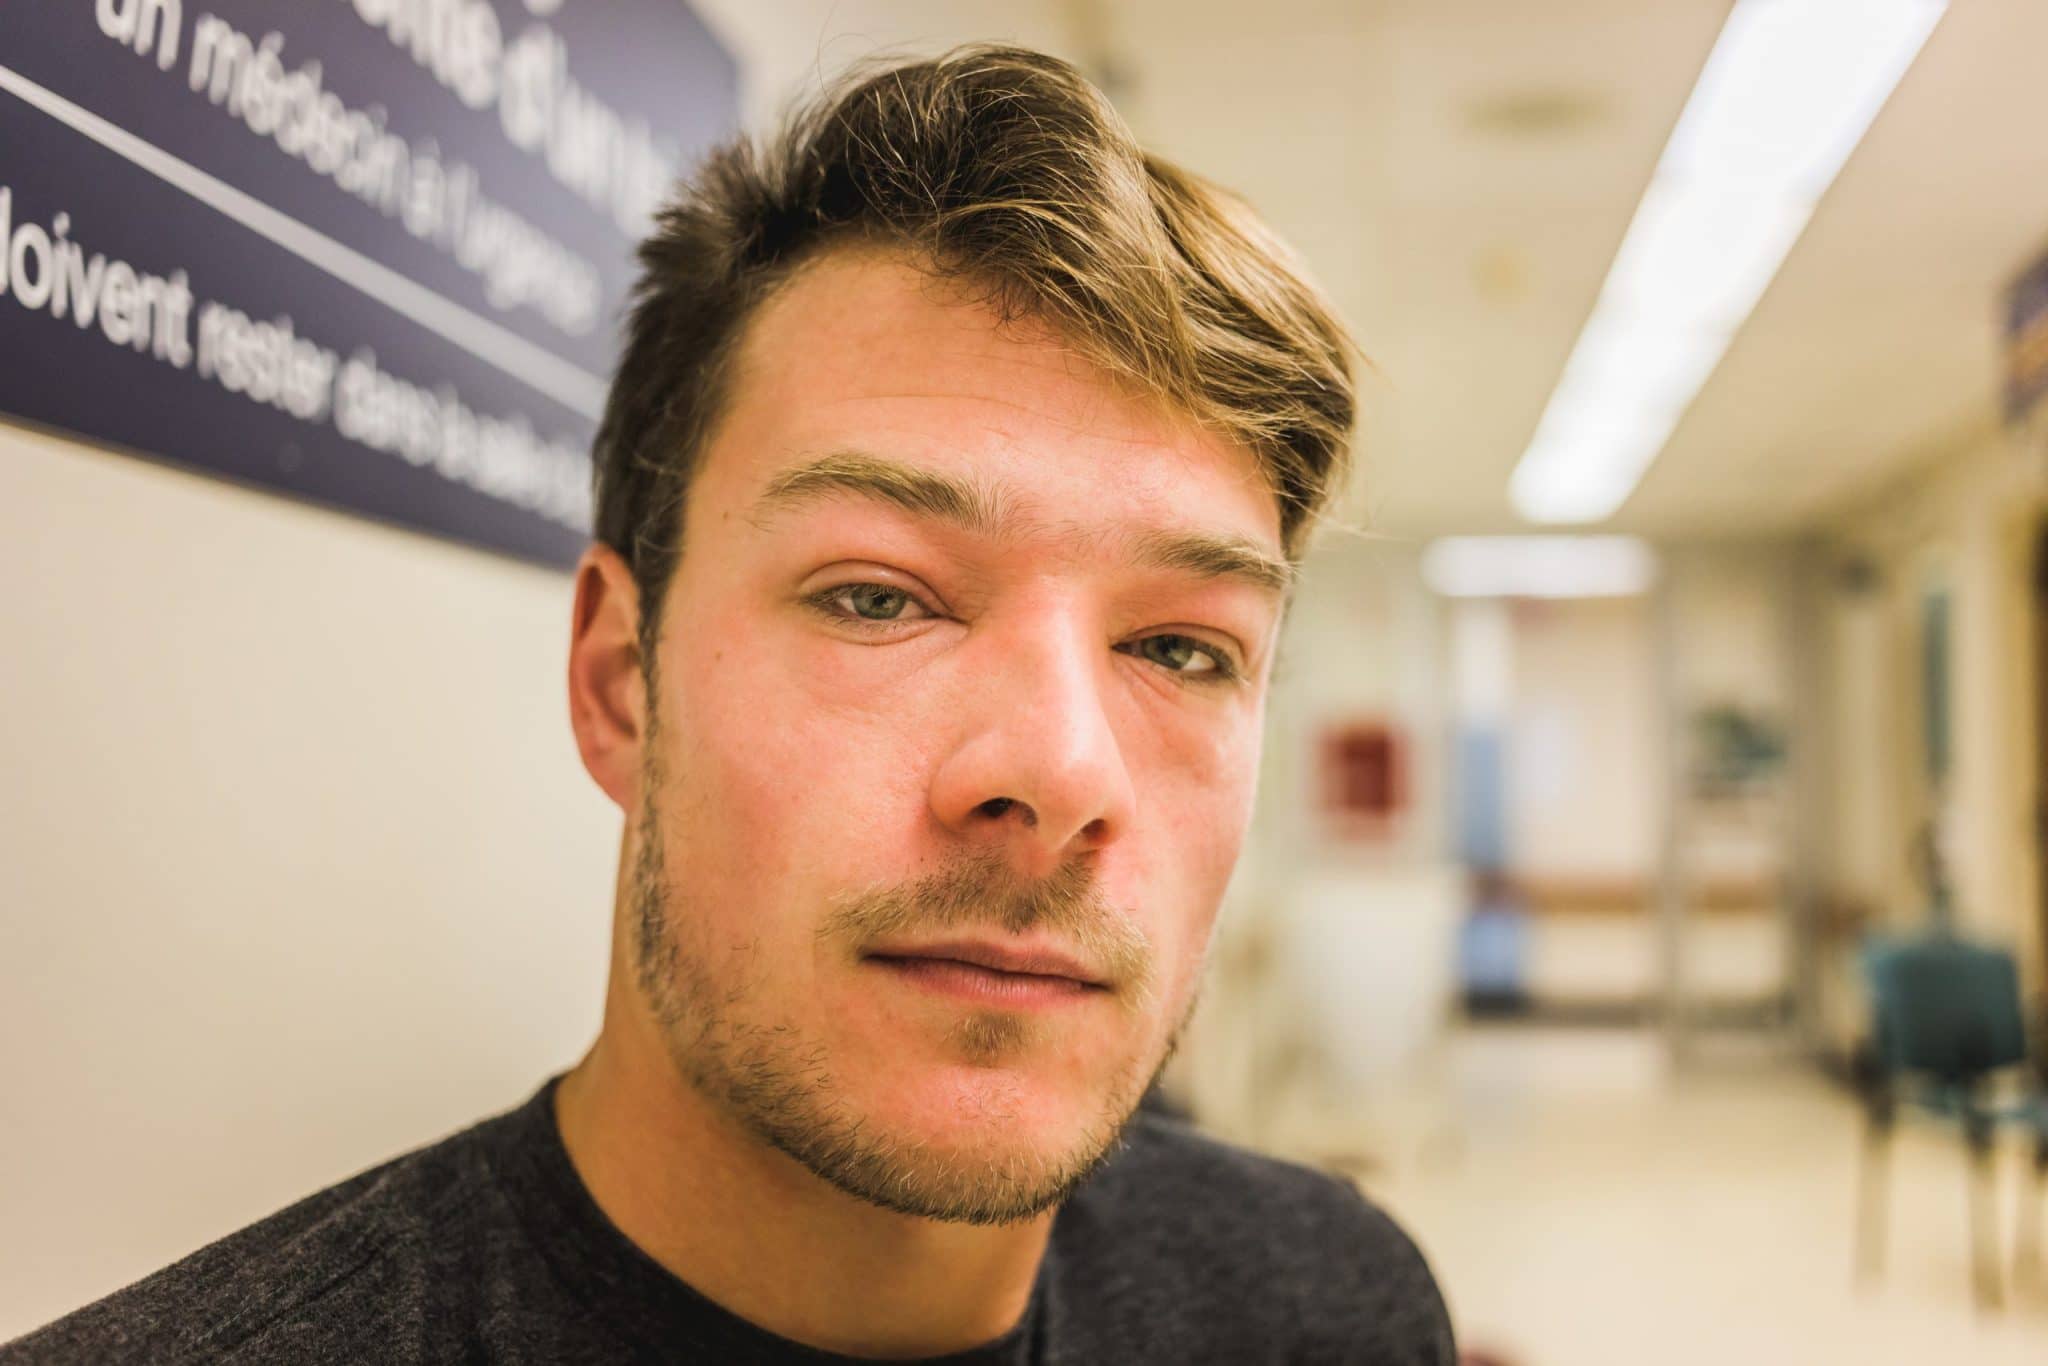 man suffering from swollen eyelids due to allergy